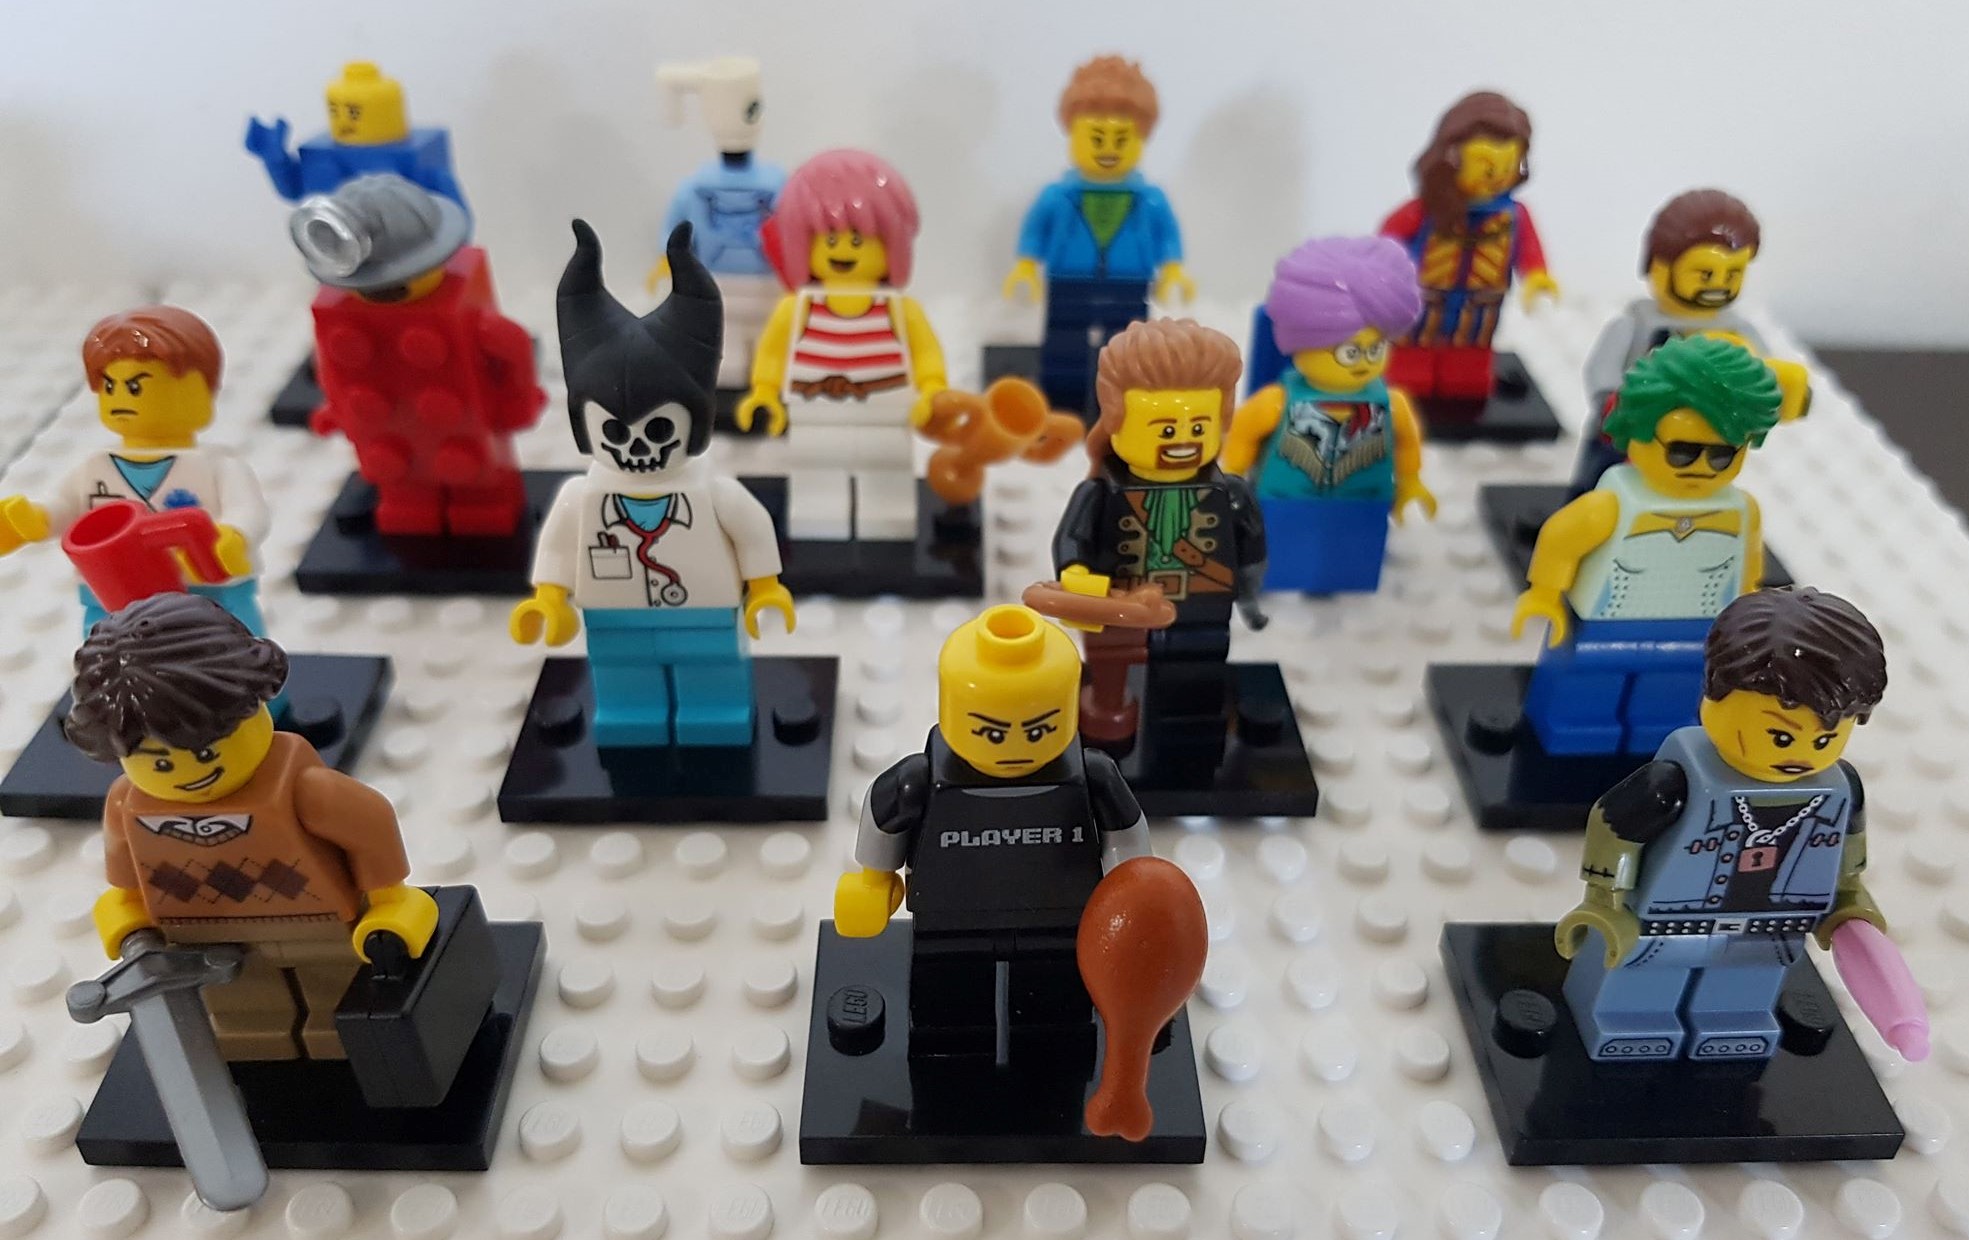 Photograph of 15 minifigures arranged in rows on a Lego baseplate. The figures have a variety of different hairstyles, heads and torsos including one which simply has a cup for a head, one which resembles a ghoul with a lab coat and stethoscope, and a bald figure wearing a shirt that reads Player 1. A few are holding items such as a sword, a trophy and a pink rolling pin.